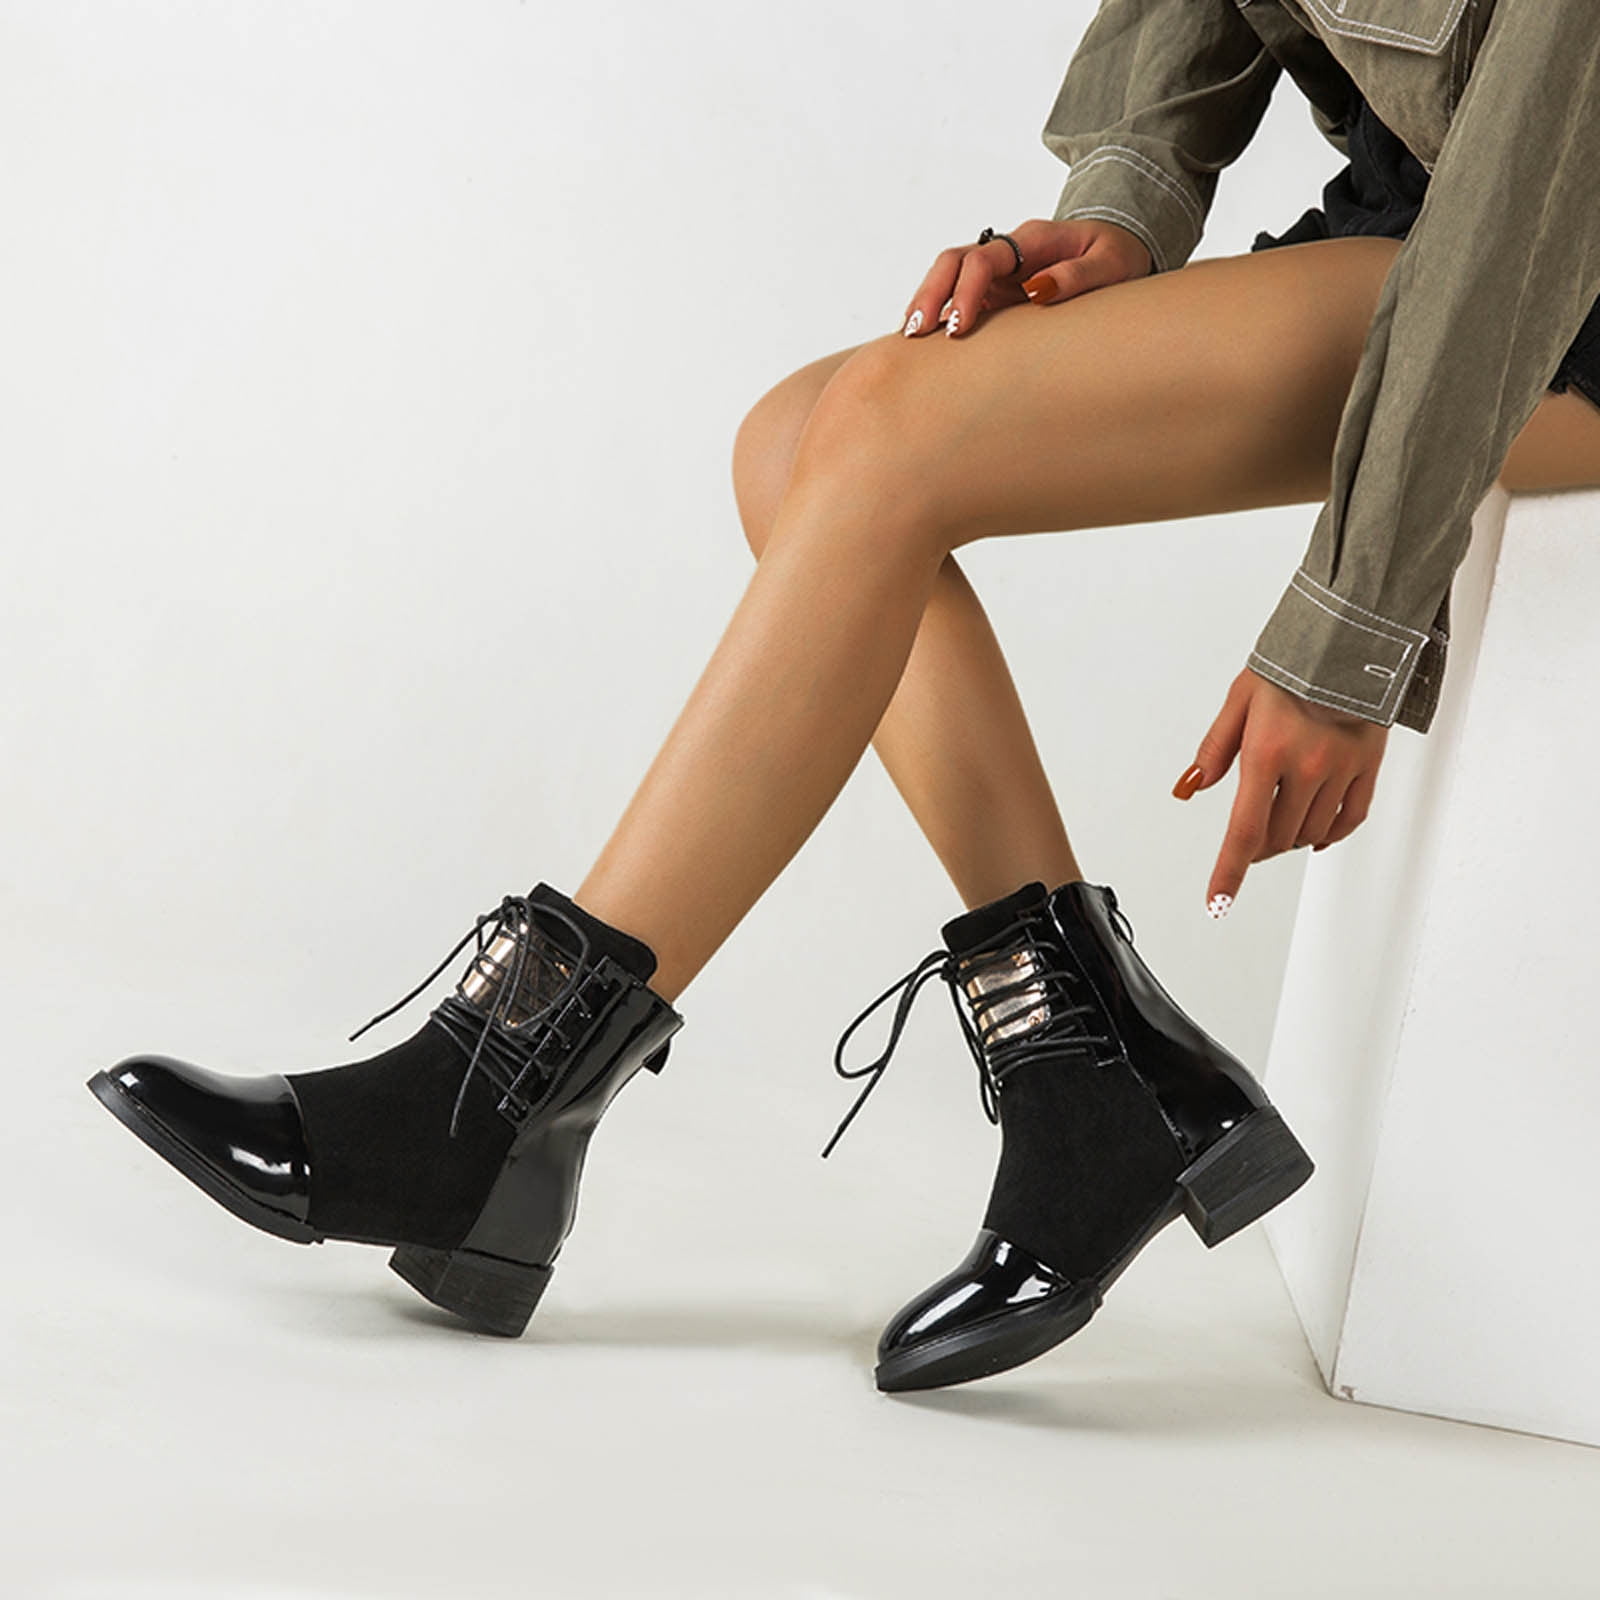 AXXD Daily Winter Slouch Boots Girl Ladies Low-Heeled Mid Calf Boots ...